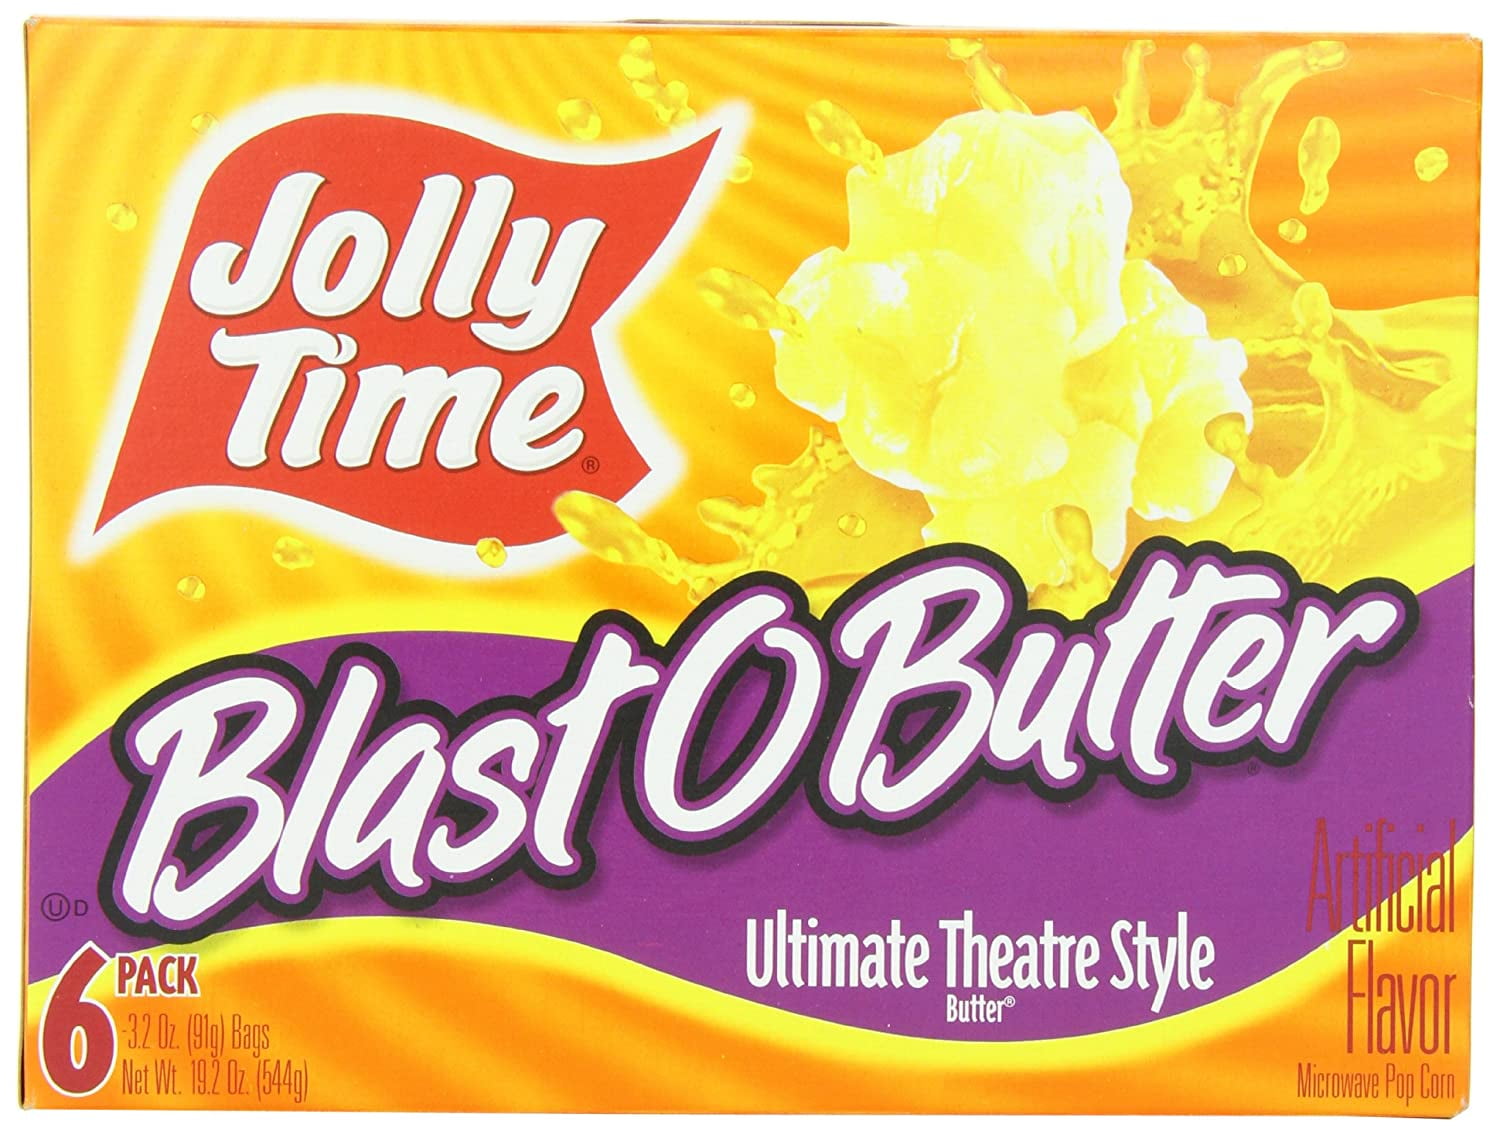 Jolly Time Blast O Butter Ultimate Theatre Style Microwave Pop Corn, 1